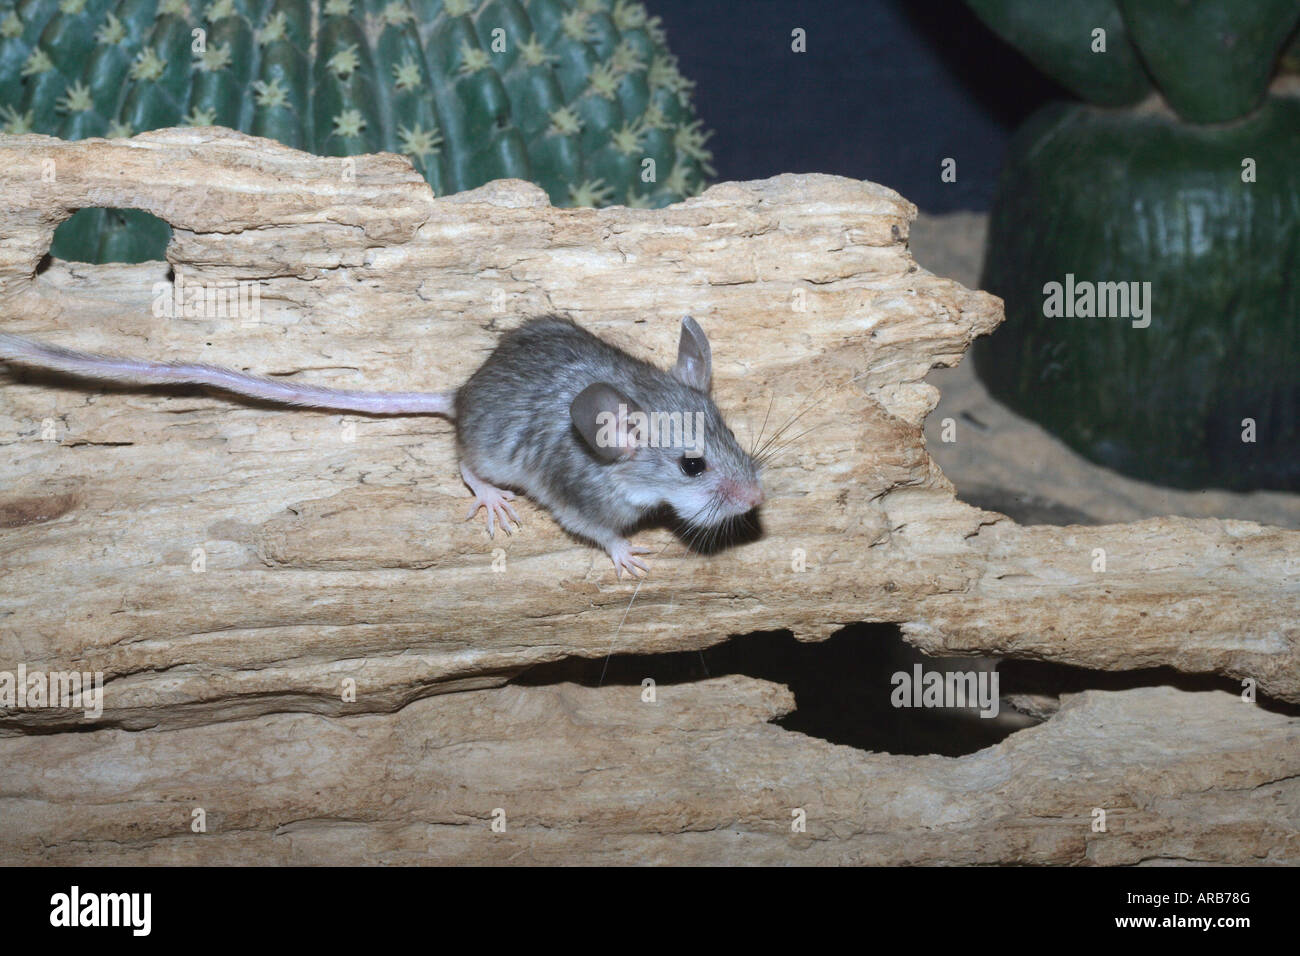 Mouse like hamster Calomyscus mystax Native to central Asia Stock Photo